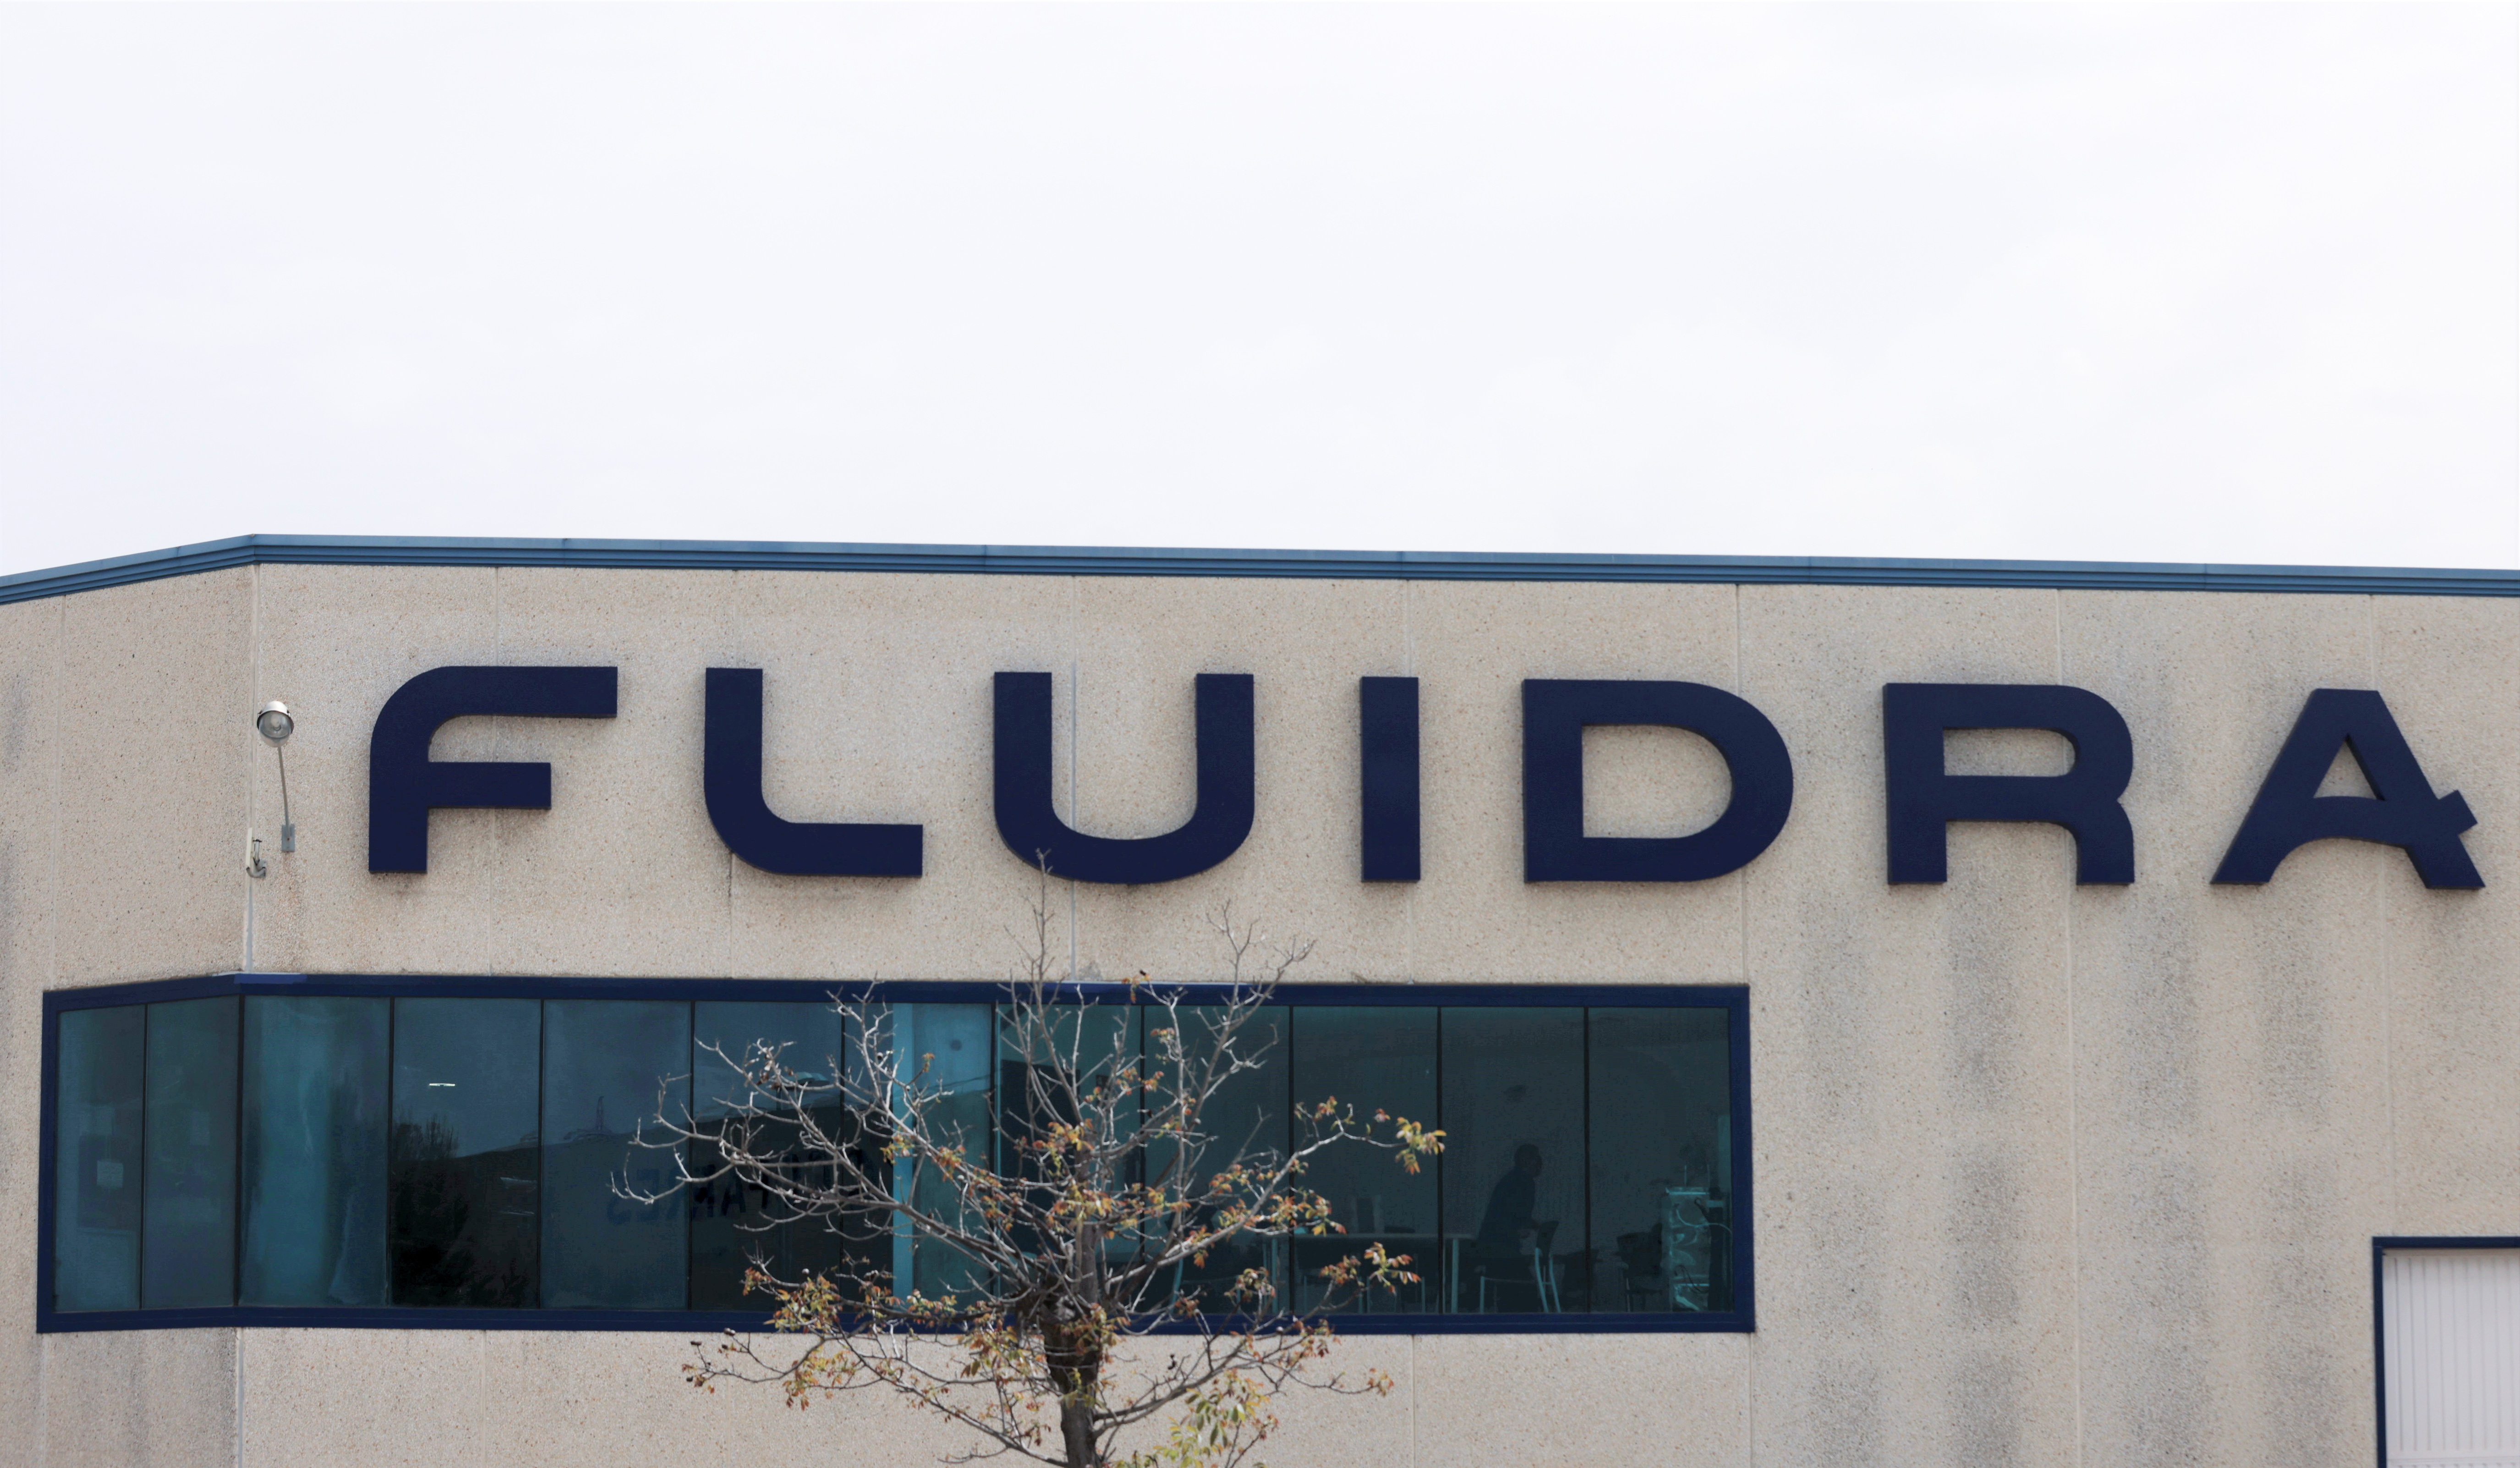 Commercial swimming pools: all you need to know - Fluidra